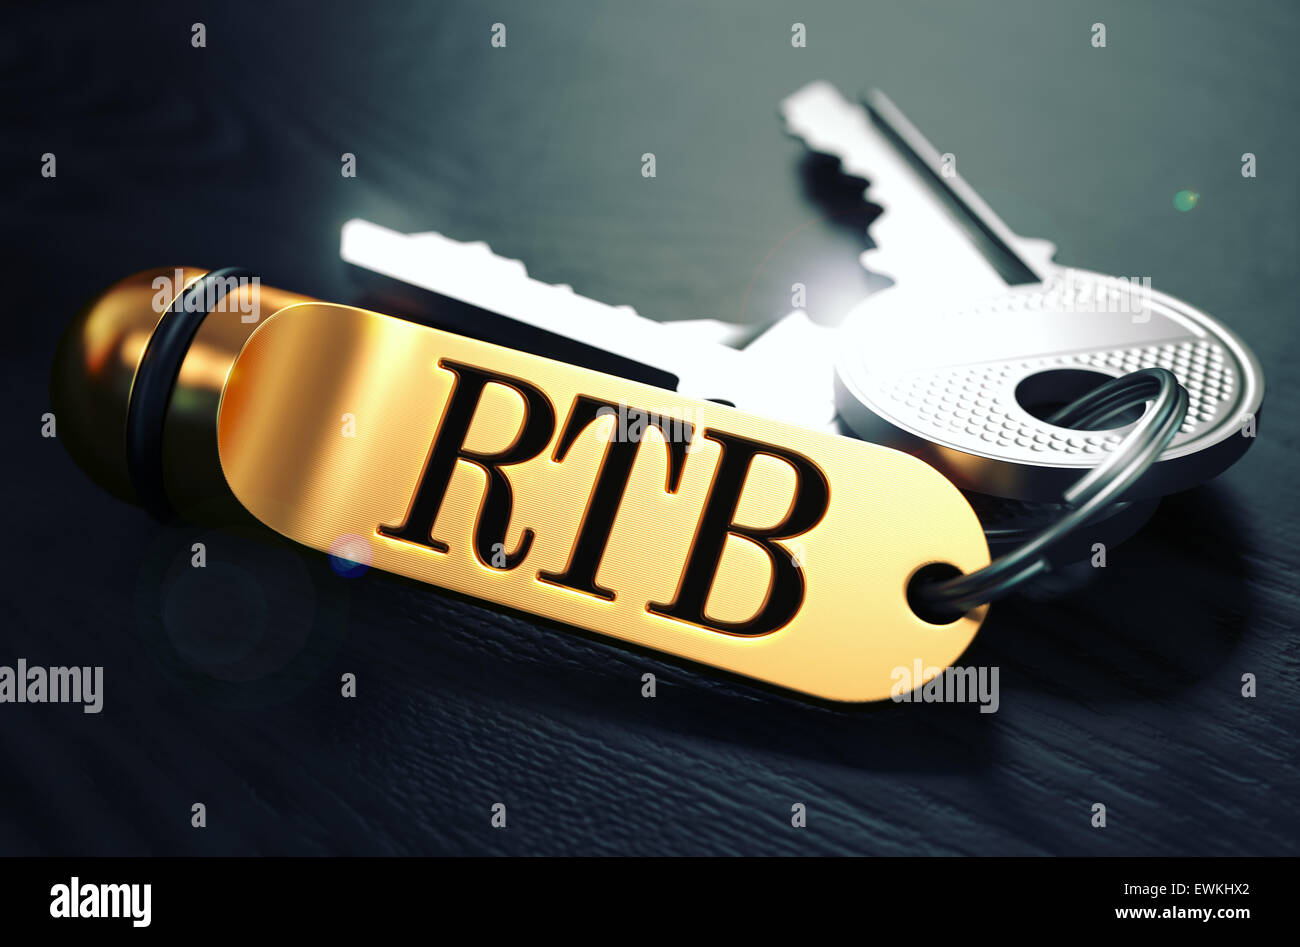 RTB - Bunch of Keys with Text on Golden Keychain. Stock Photo